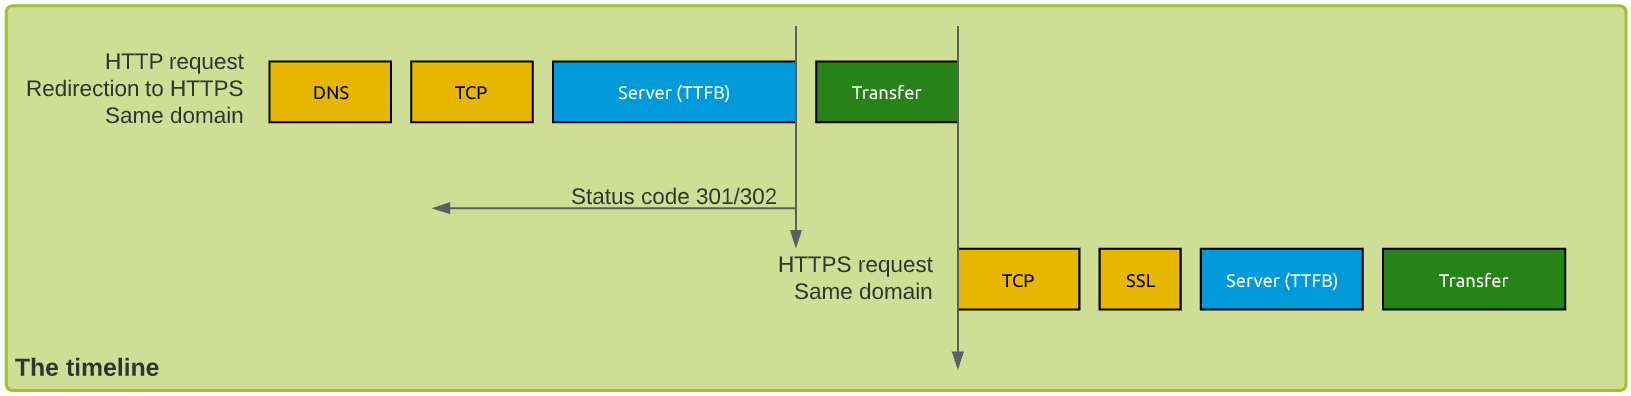 The different steps in a HTTP redirect process